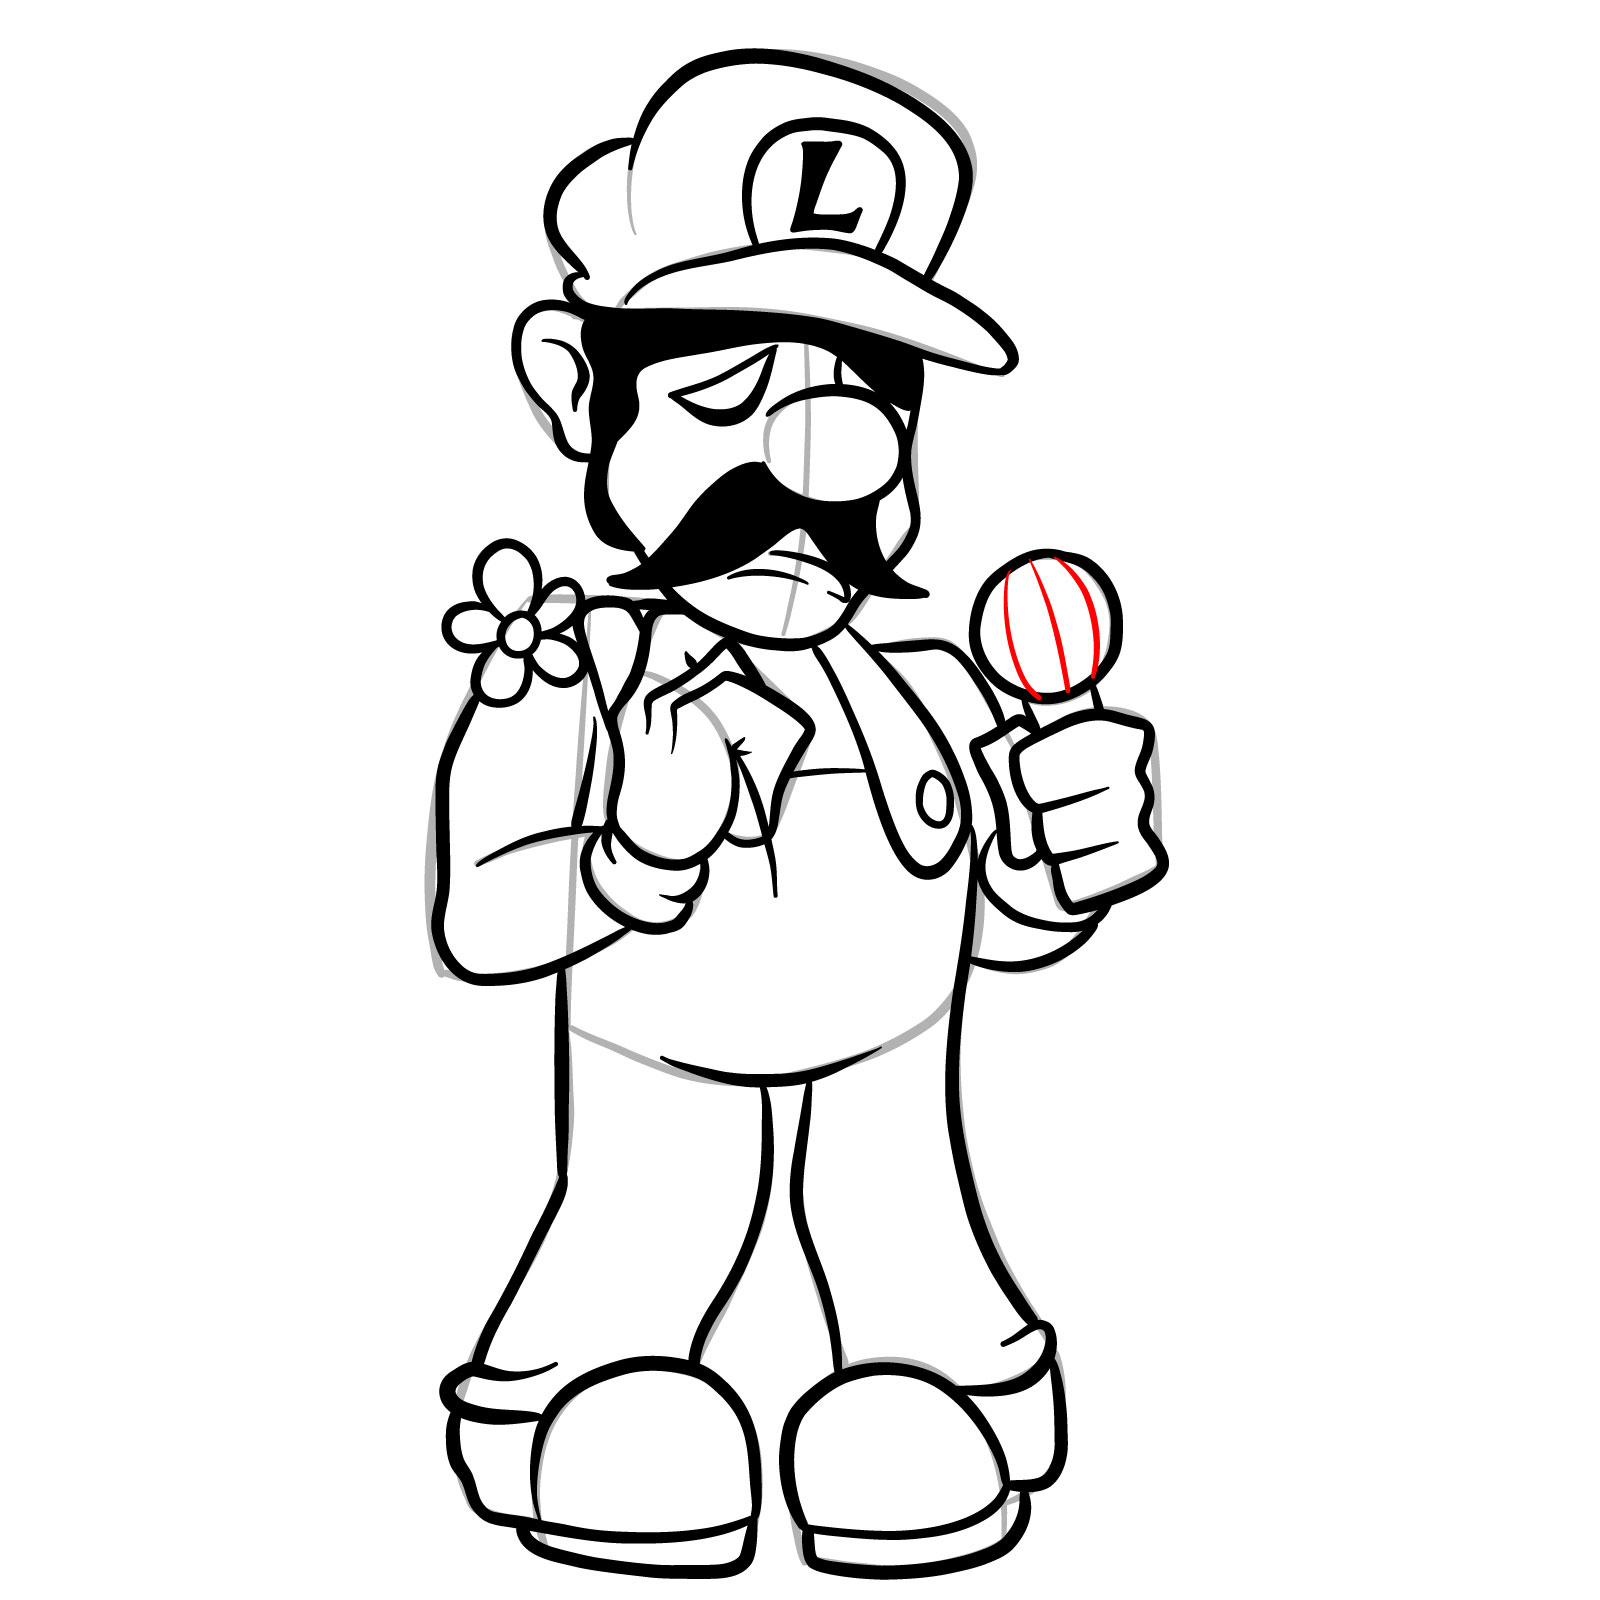 How to draw Beta Luigi from FNF - step 32